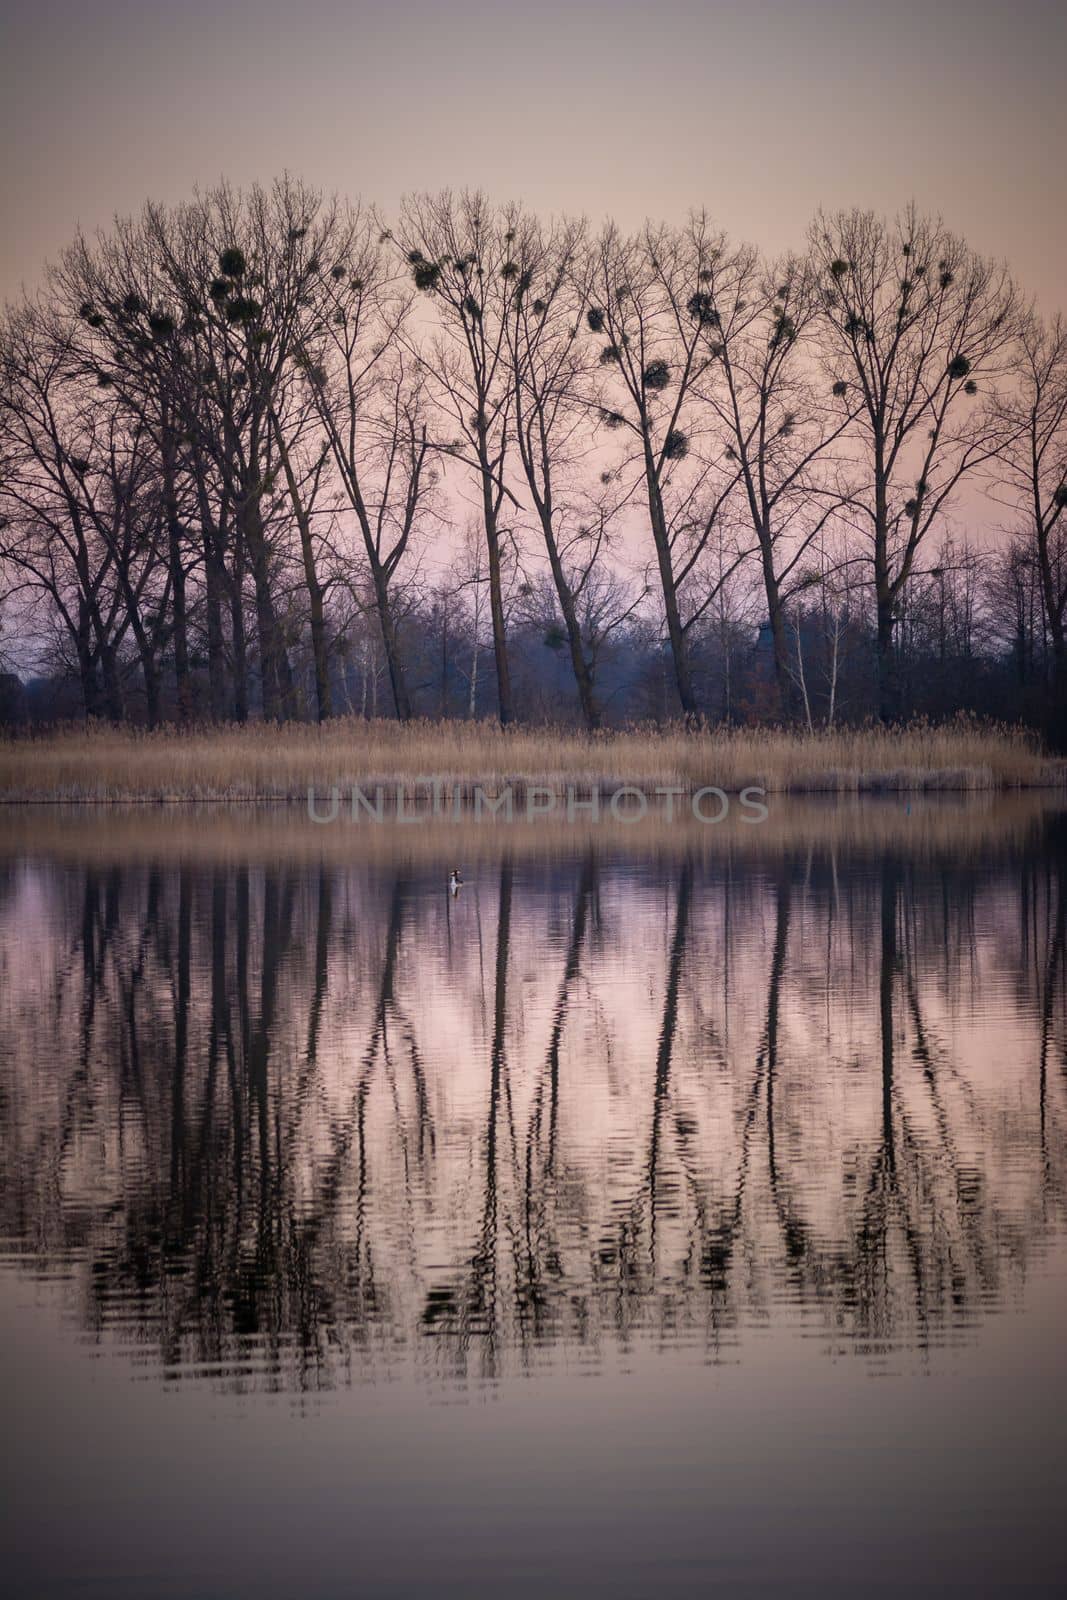 Reflection of trees without leaves in the water, spring evening